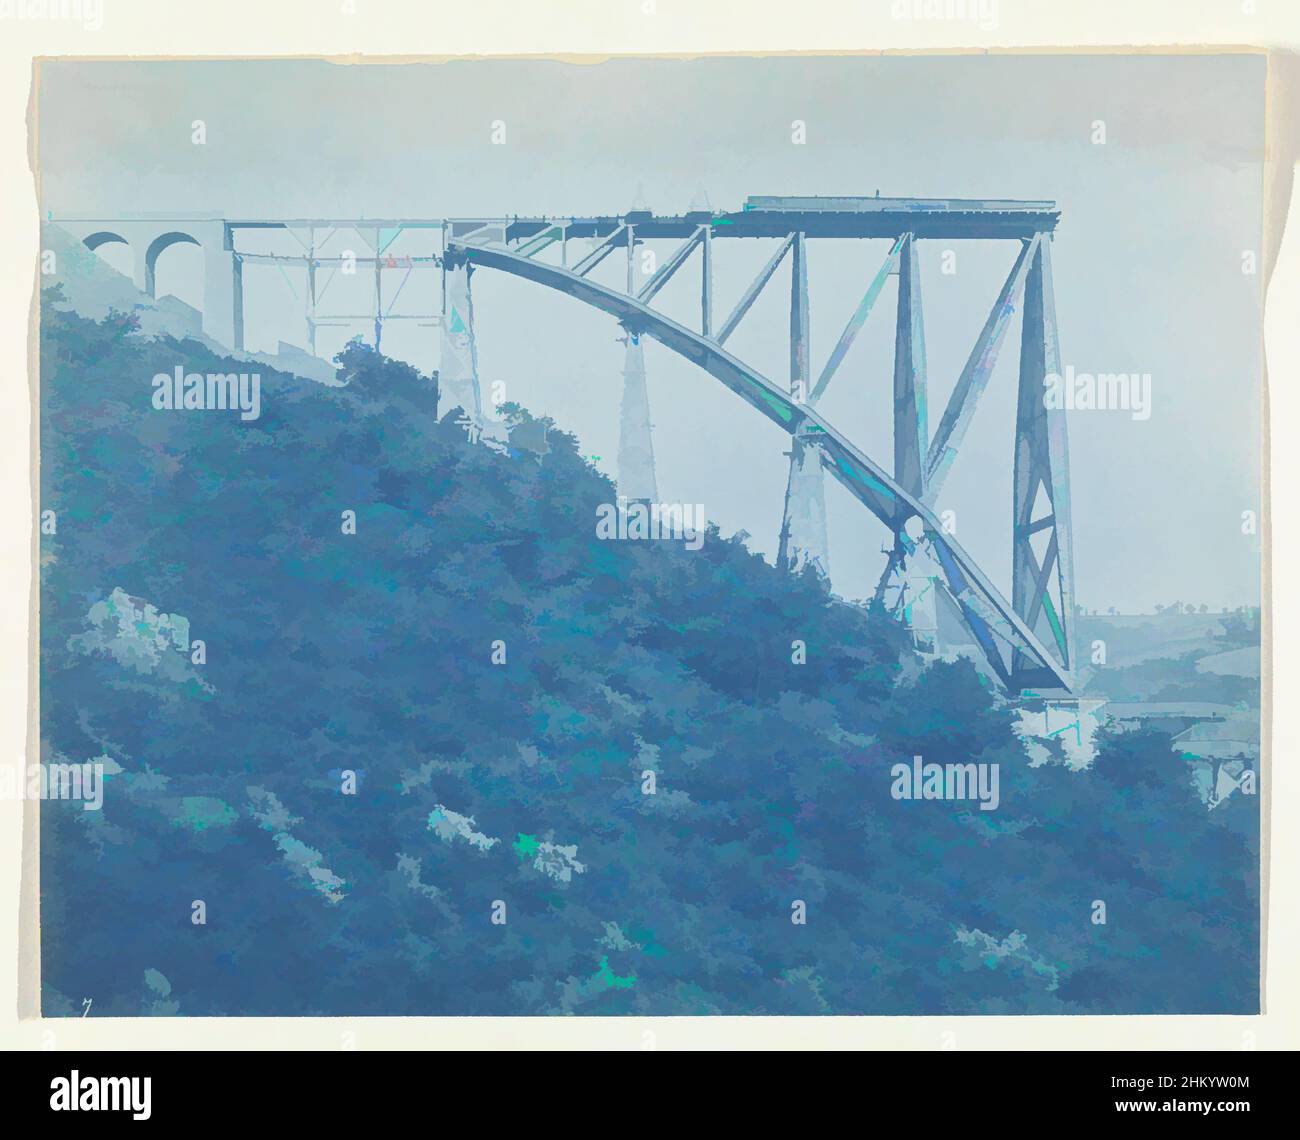 Art inspired by Construction of the Viaur Viaduct in France by the Societé de Construction des Battignolles, July 6, 1900, France, 6-Jul-1900, photographic support, cyanotype, height 224 mm × width 285 mm, Classic works modernized by Artotop with a splash of modernity. Shapes, color and value, eye-catching visual impact on art. Emotions through freedom of artworks in a contemporary way. A timeless message pursuing a wildly creative new direction. Artists turning to the digital medium and creating the Artotop NFT Stock Photo